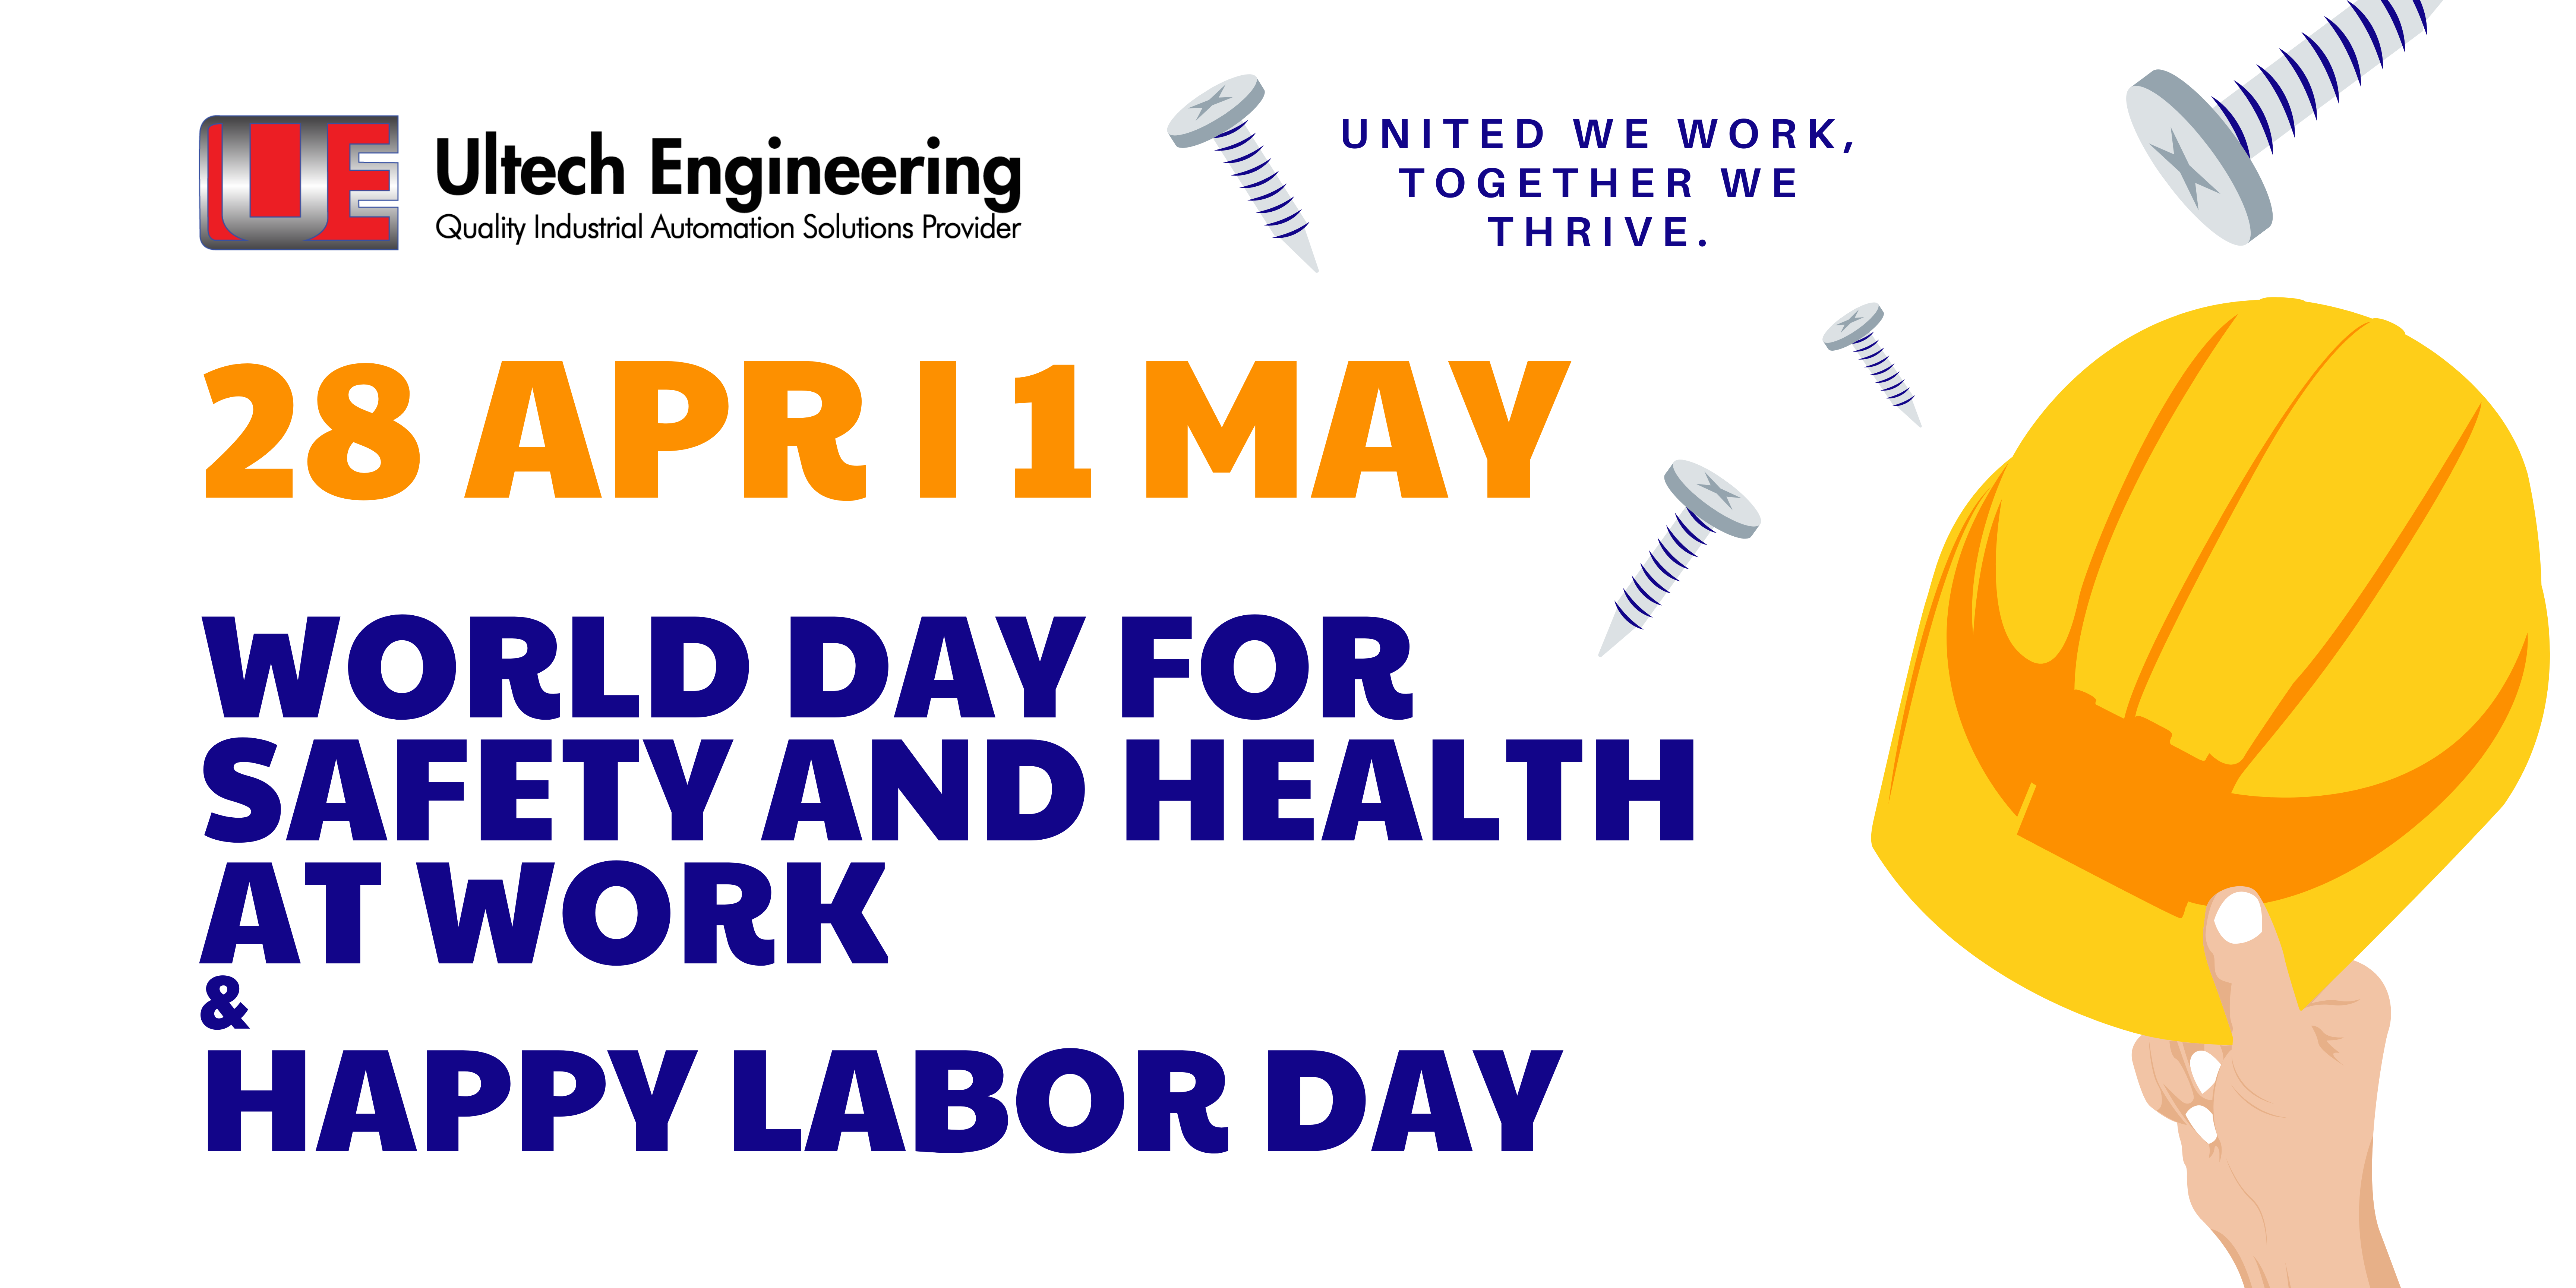 World day for safety and health at work & Happy Labor Day